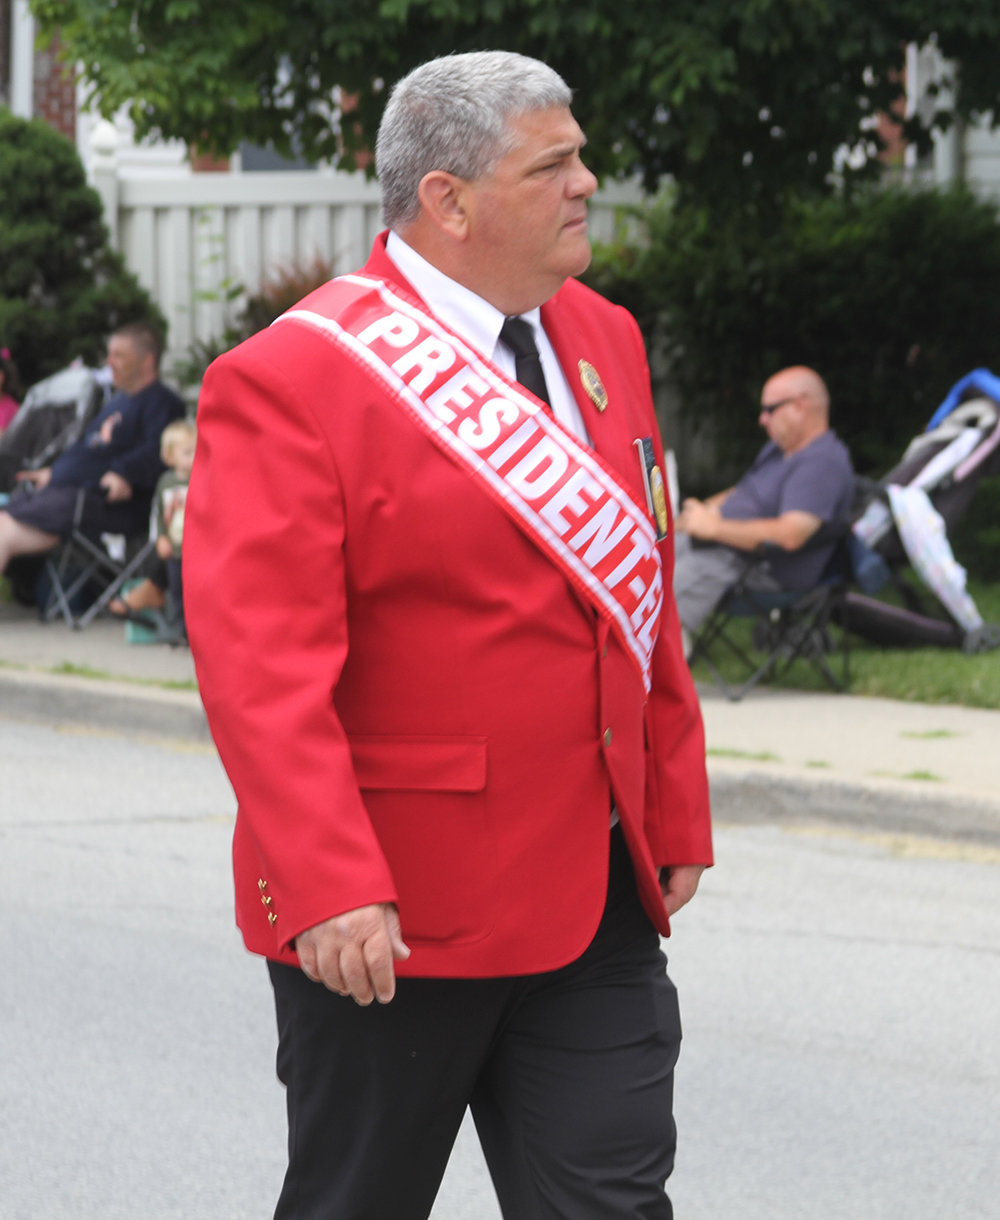 HVVFA President-elect Eric Orr of Wallkill marched in the parade. He was installed as President at the end of the convention.